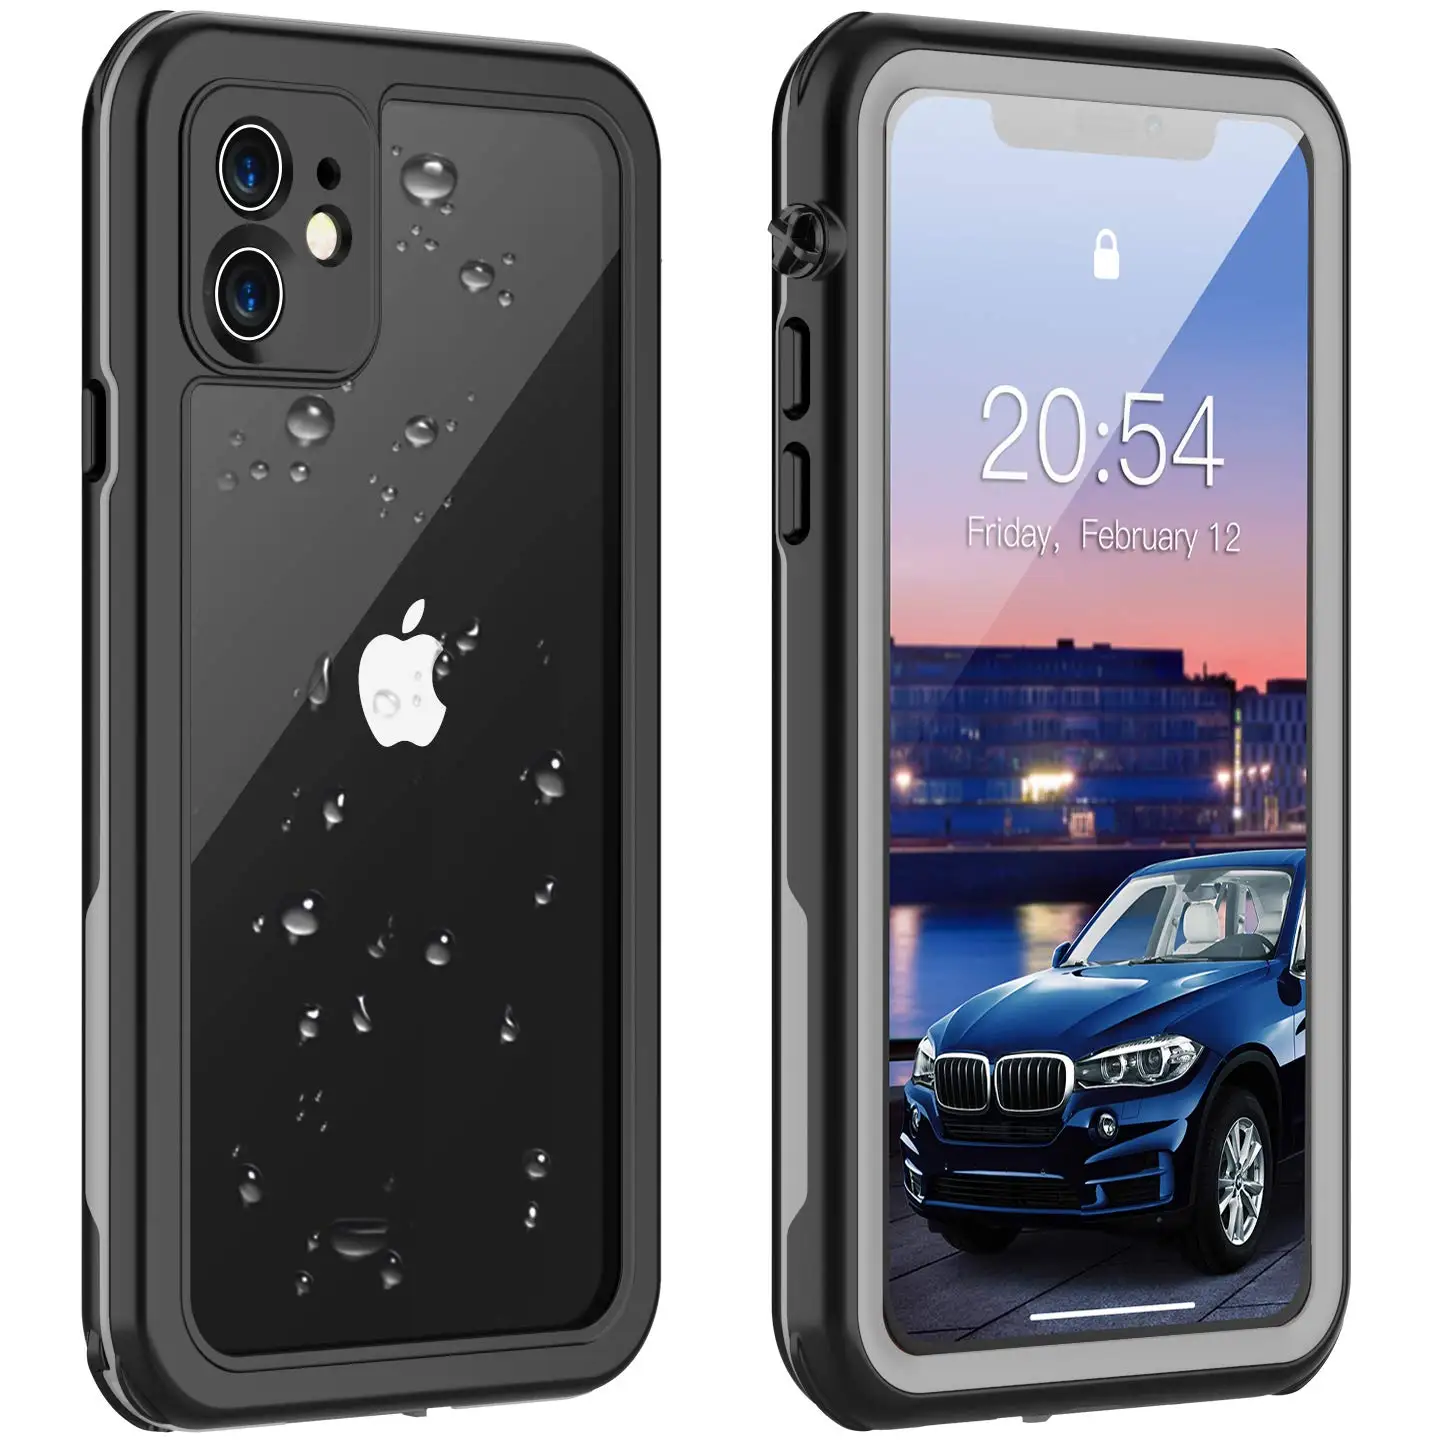 

For iPhone 11 Case Full-Body Rugged with Built-in Screen Protector Shockproof Dustproof Waterproof Case for iPhone11 Pro/Pro Max